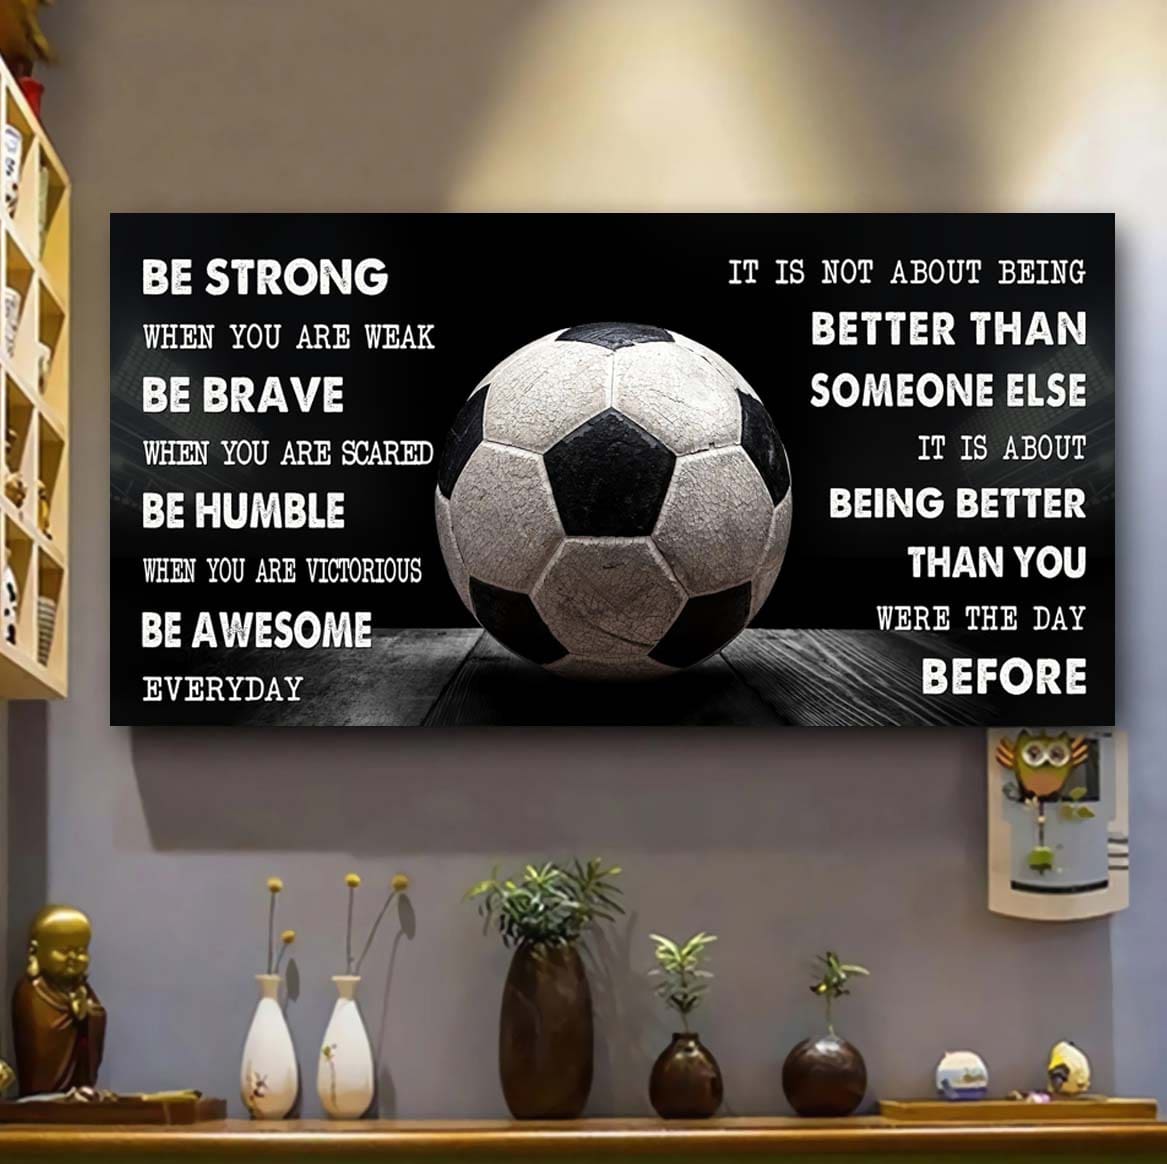 Be Awesome Soccer Canvas It Is Not About Being Better Than Someone Else - Be Strong When You Are Weak